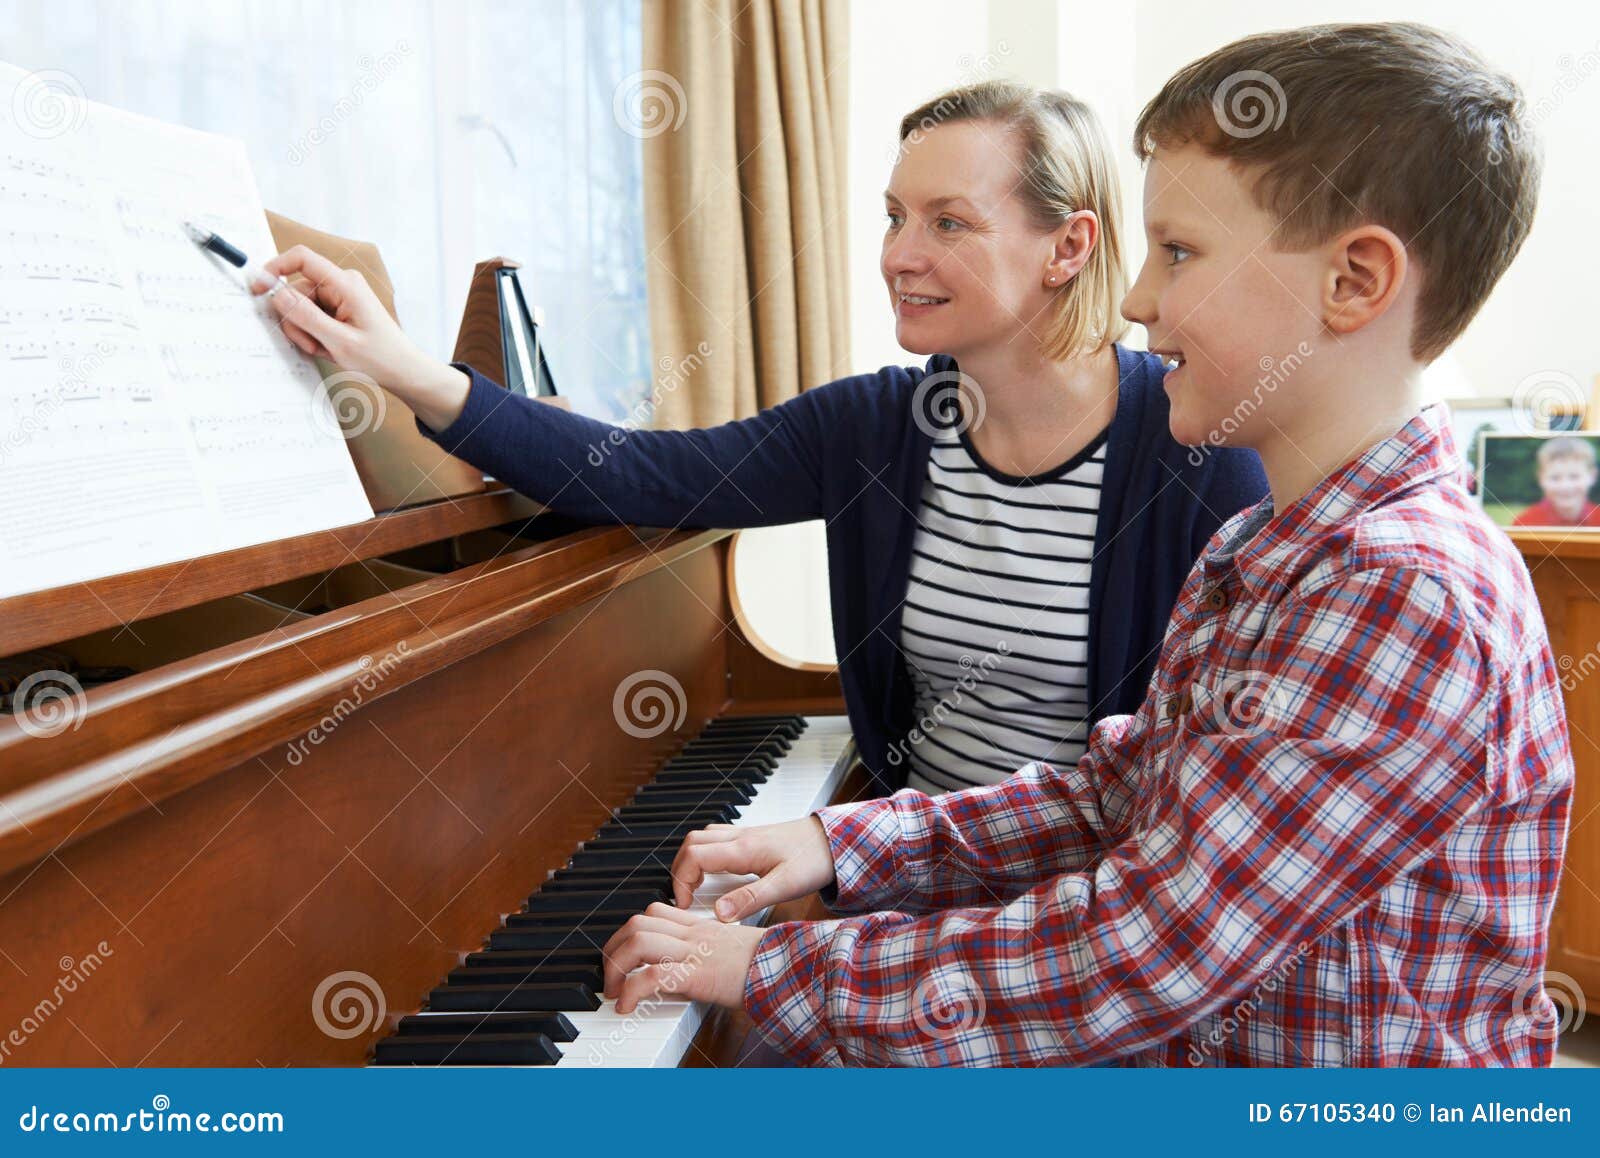 boy with music teacher having lesson at piano